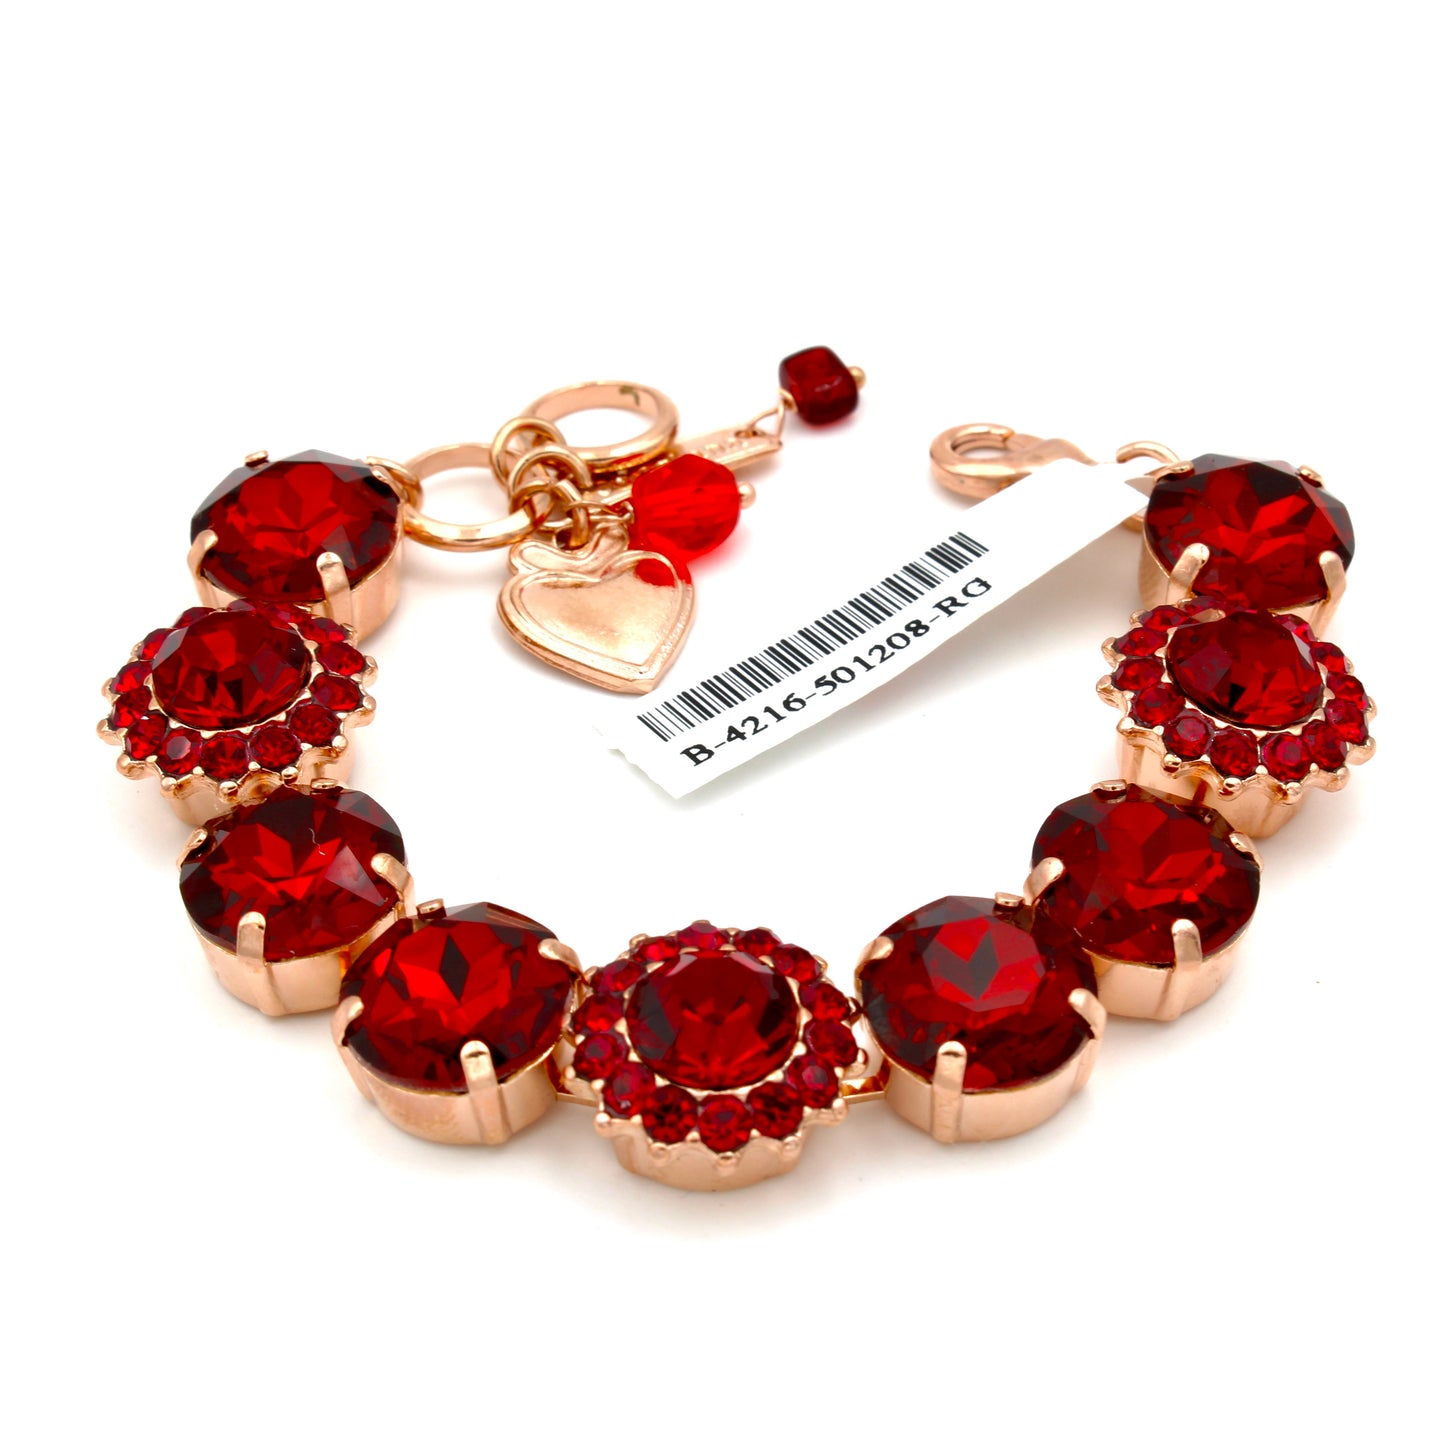 Ruby and Siam Red Extra Luxurious Bracelet in Rose Gold - MaryTyke's